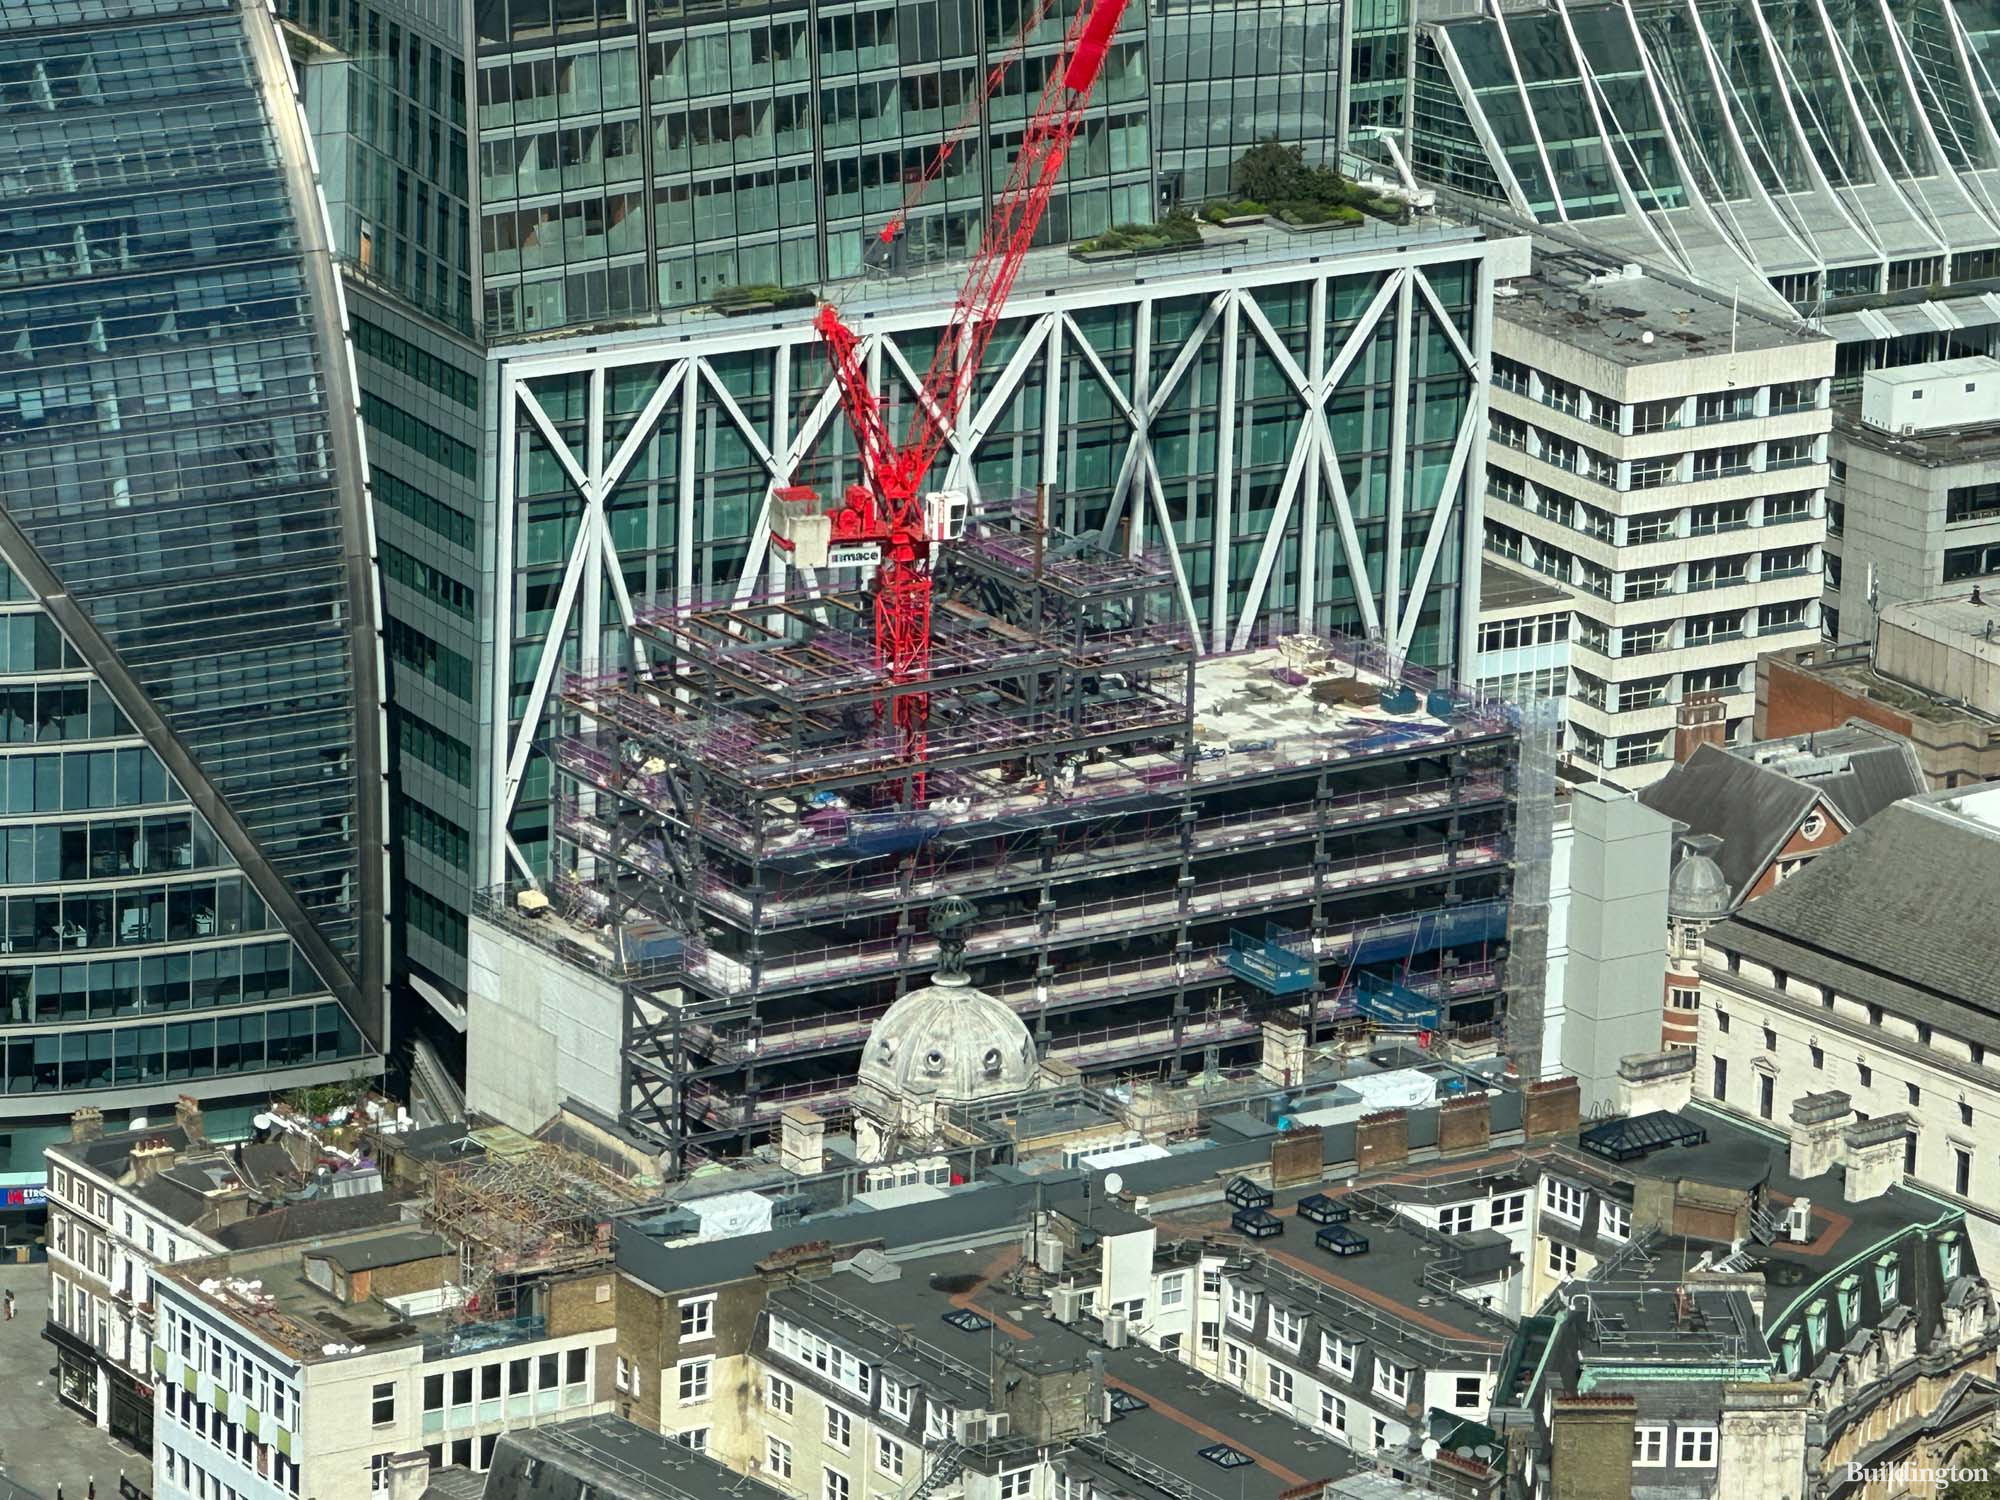 101 Moorgate development from The Lookout viewing gallery at 8 Bishopsgate in the City of London EC2.